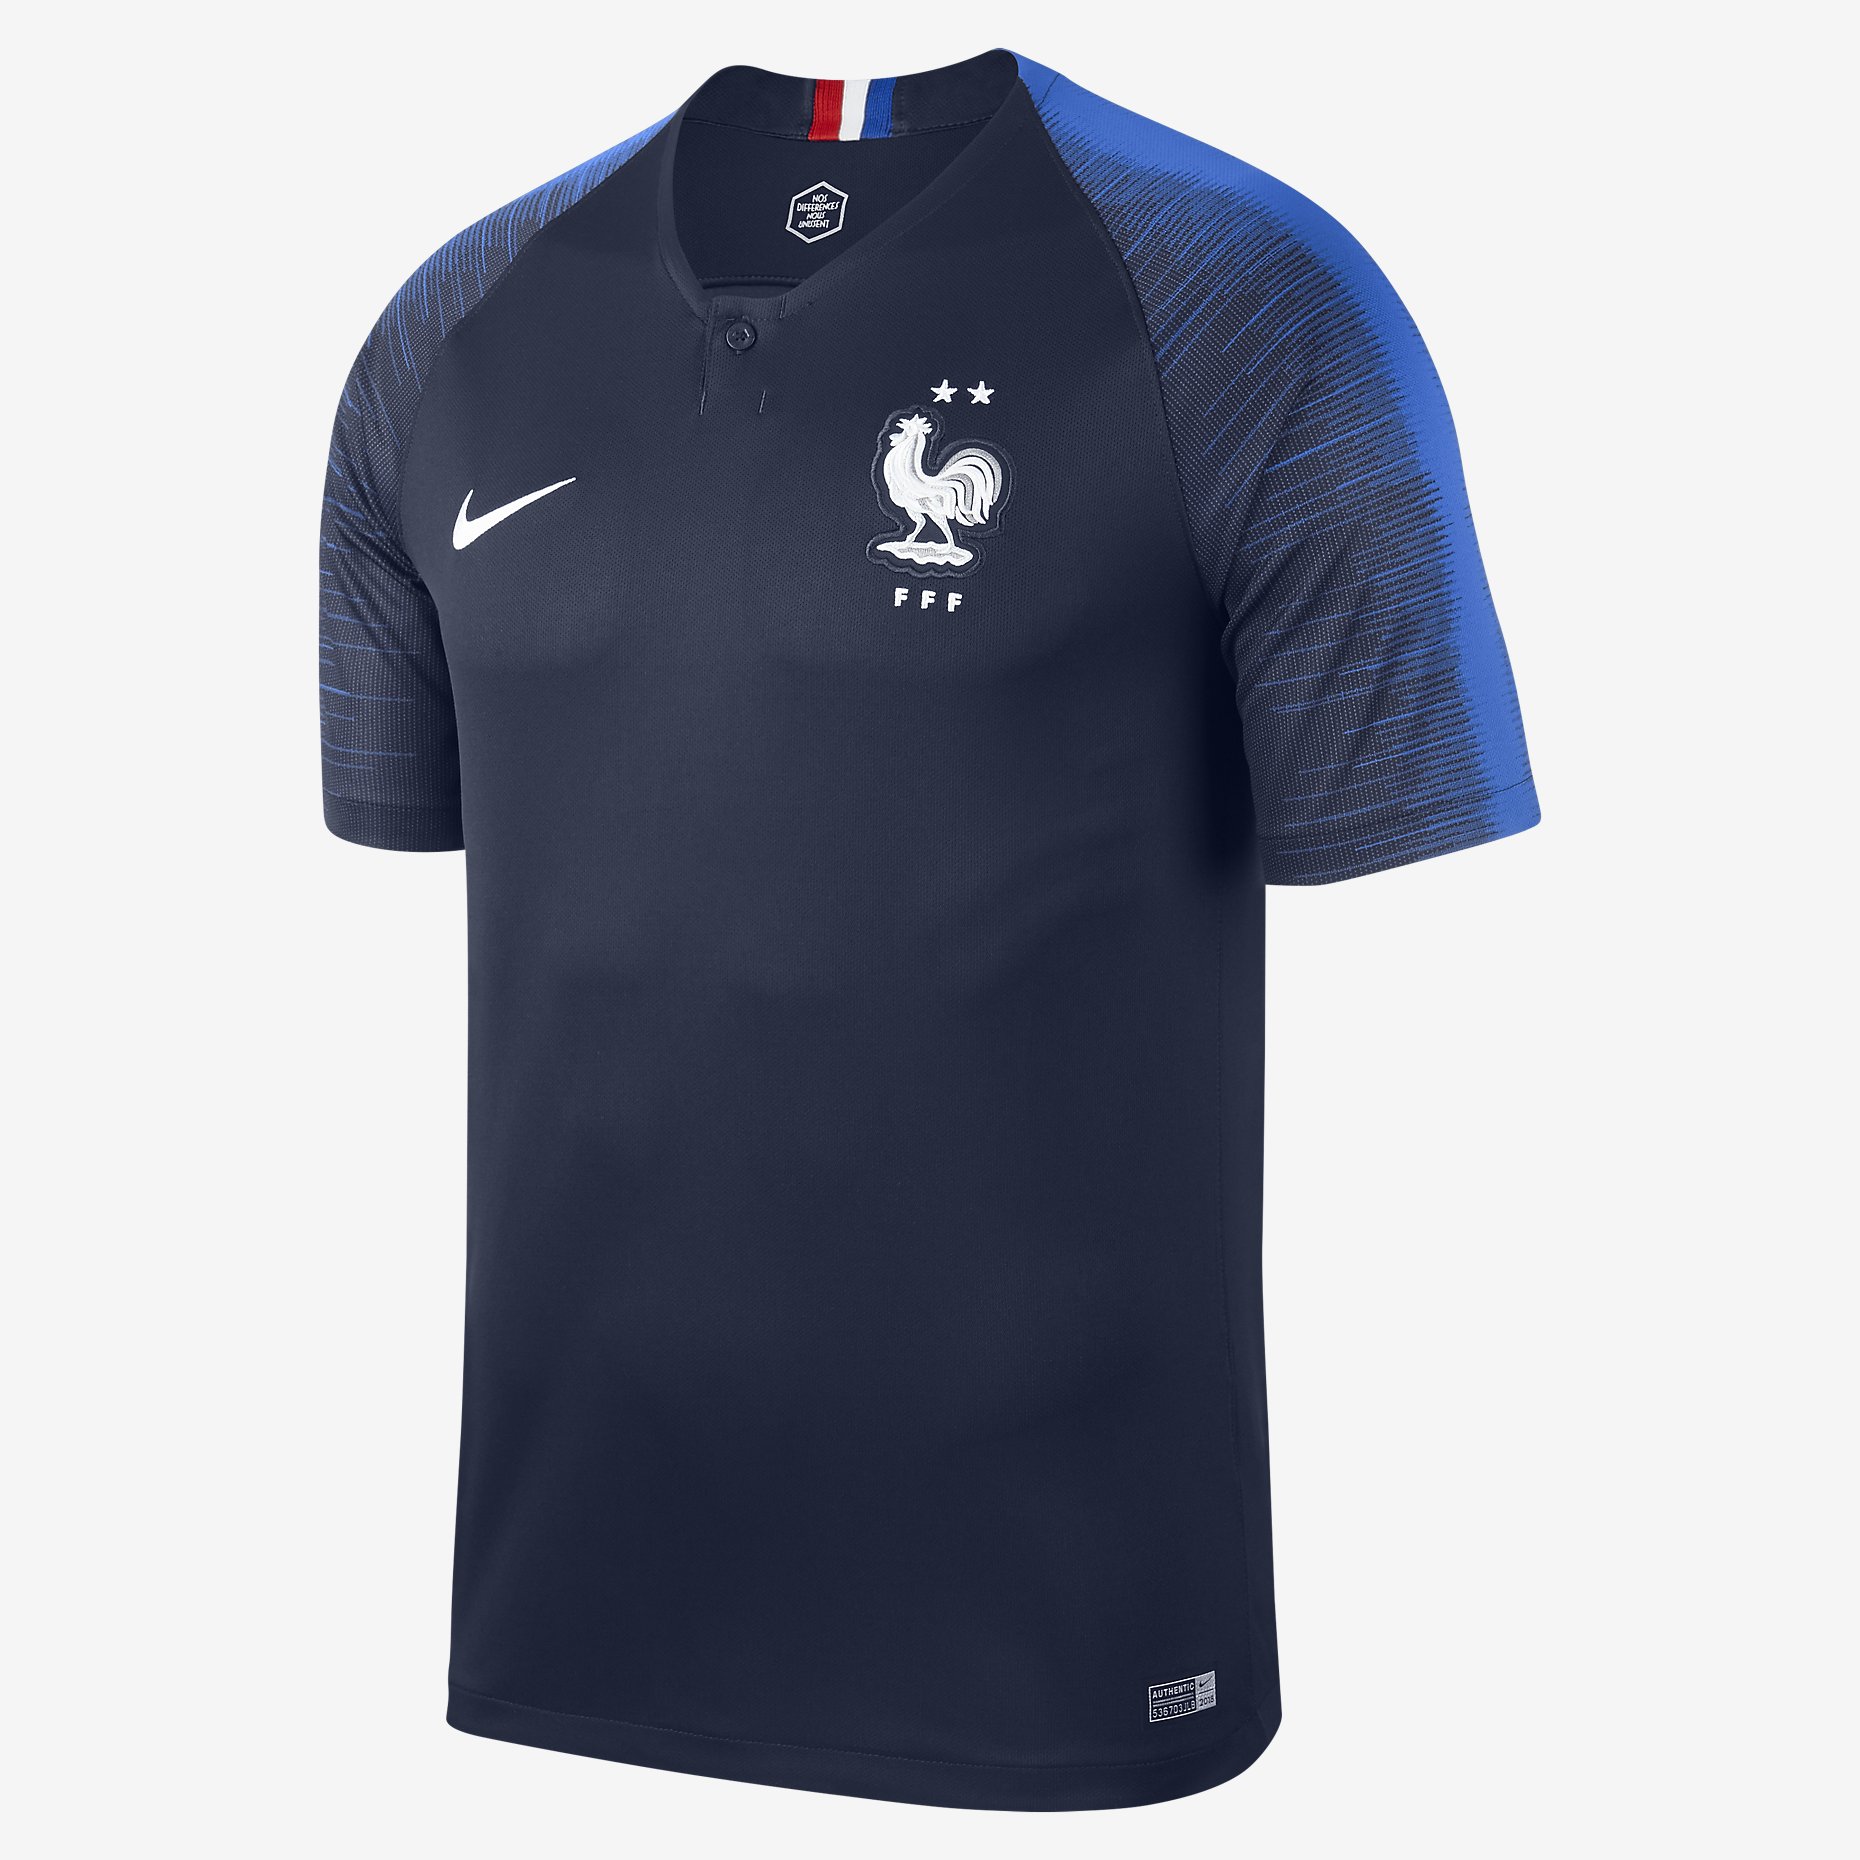 maillot foot pas cher 2017 2018